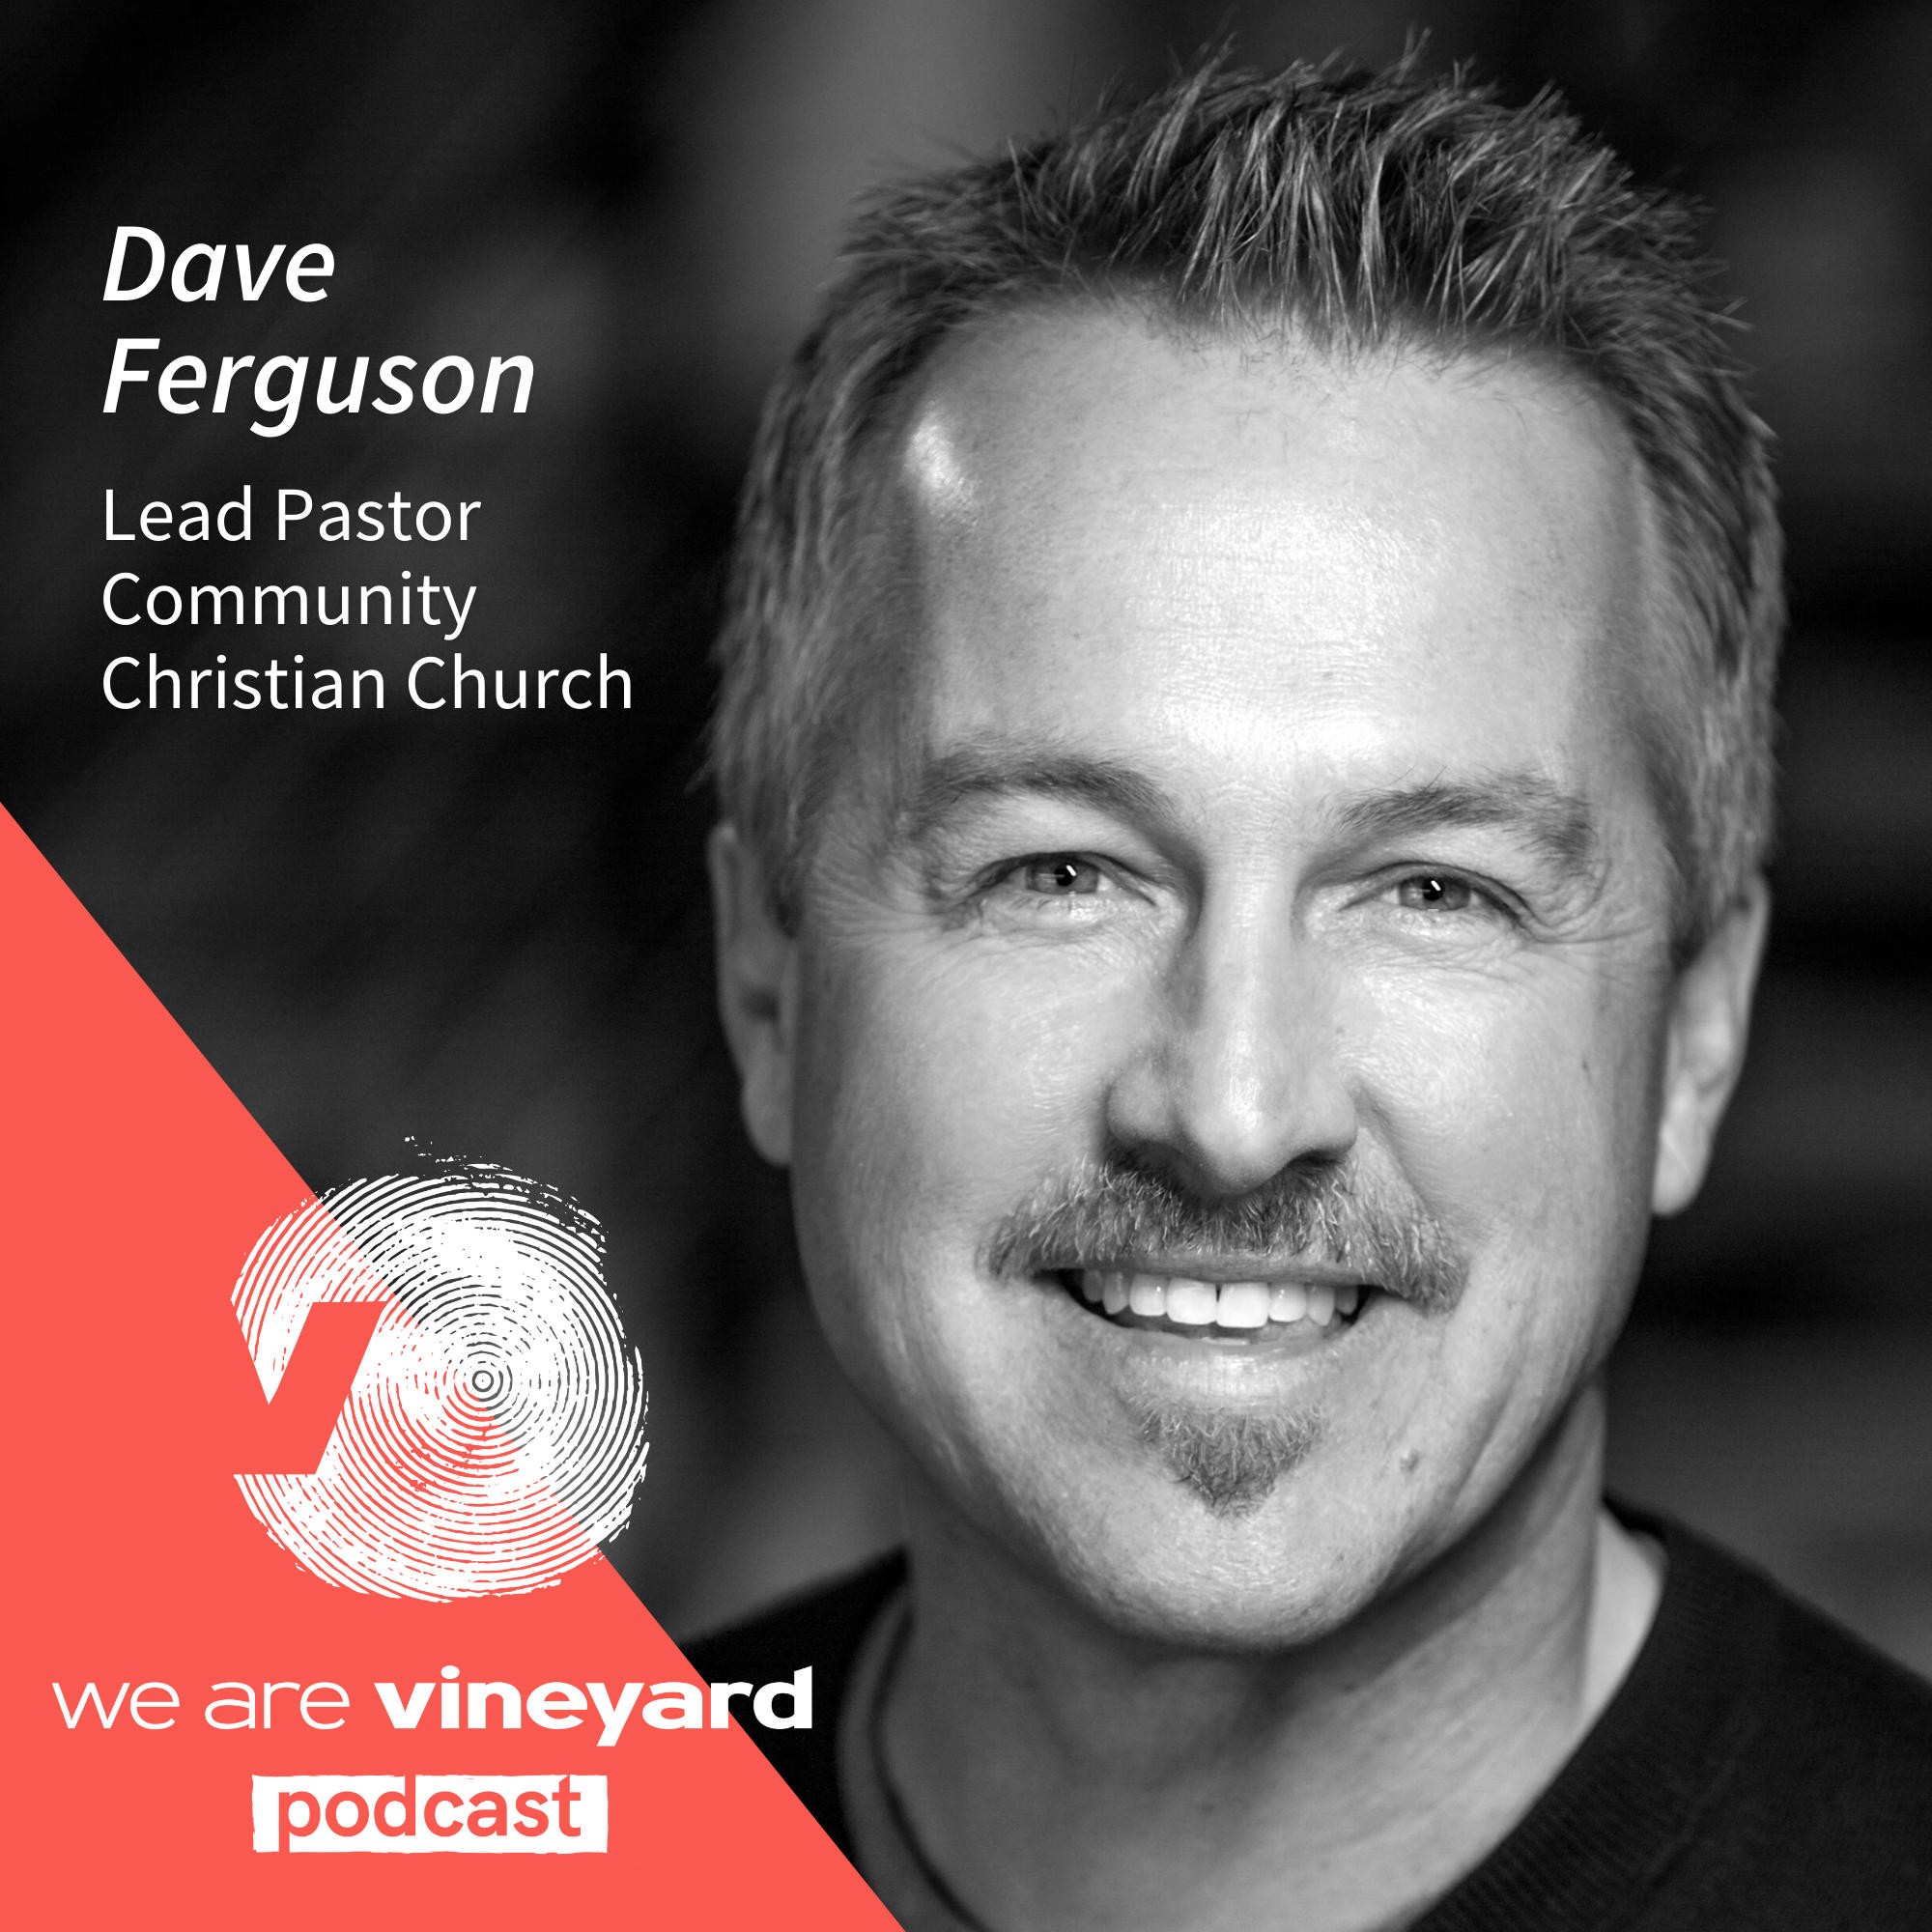 Dave Ferguson: Making Heroes Of Other People - Our Fruit Grows On Other People's Trees